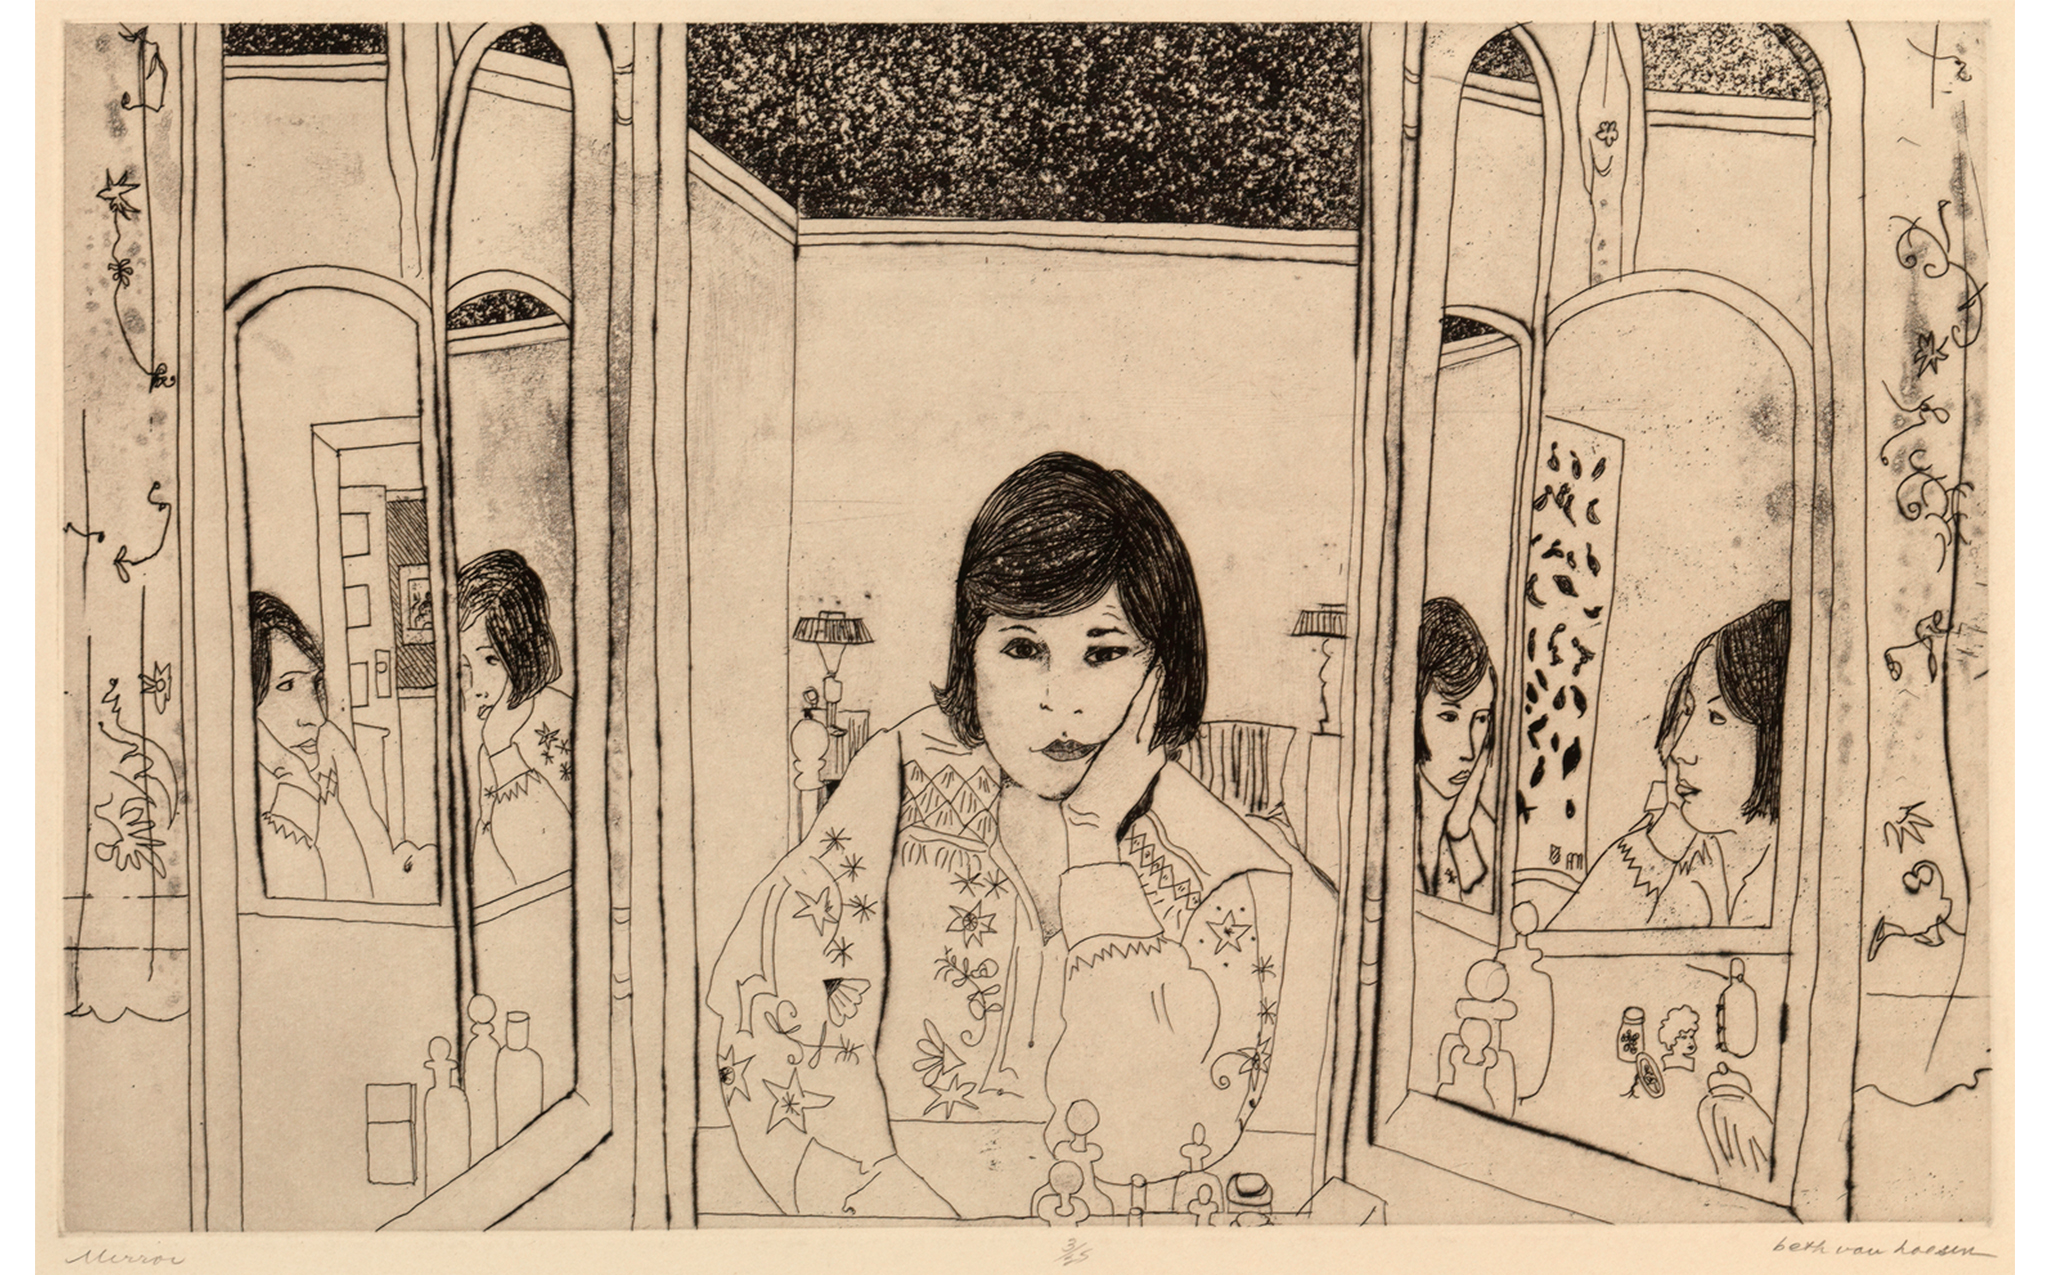 woman with dark chin length hair wearing printed blouse sitting before three way mirror with chin in proper left hand, she is reflected twice at left and twice at right, part of room with lamps and chair visible beyond her